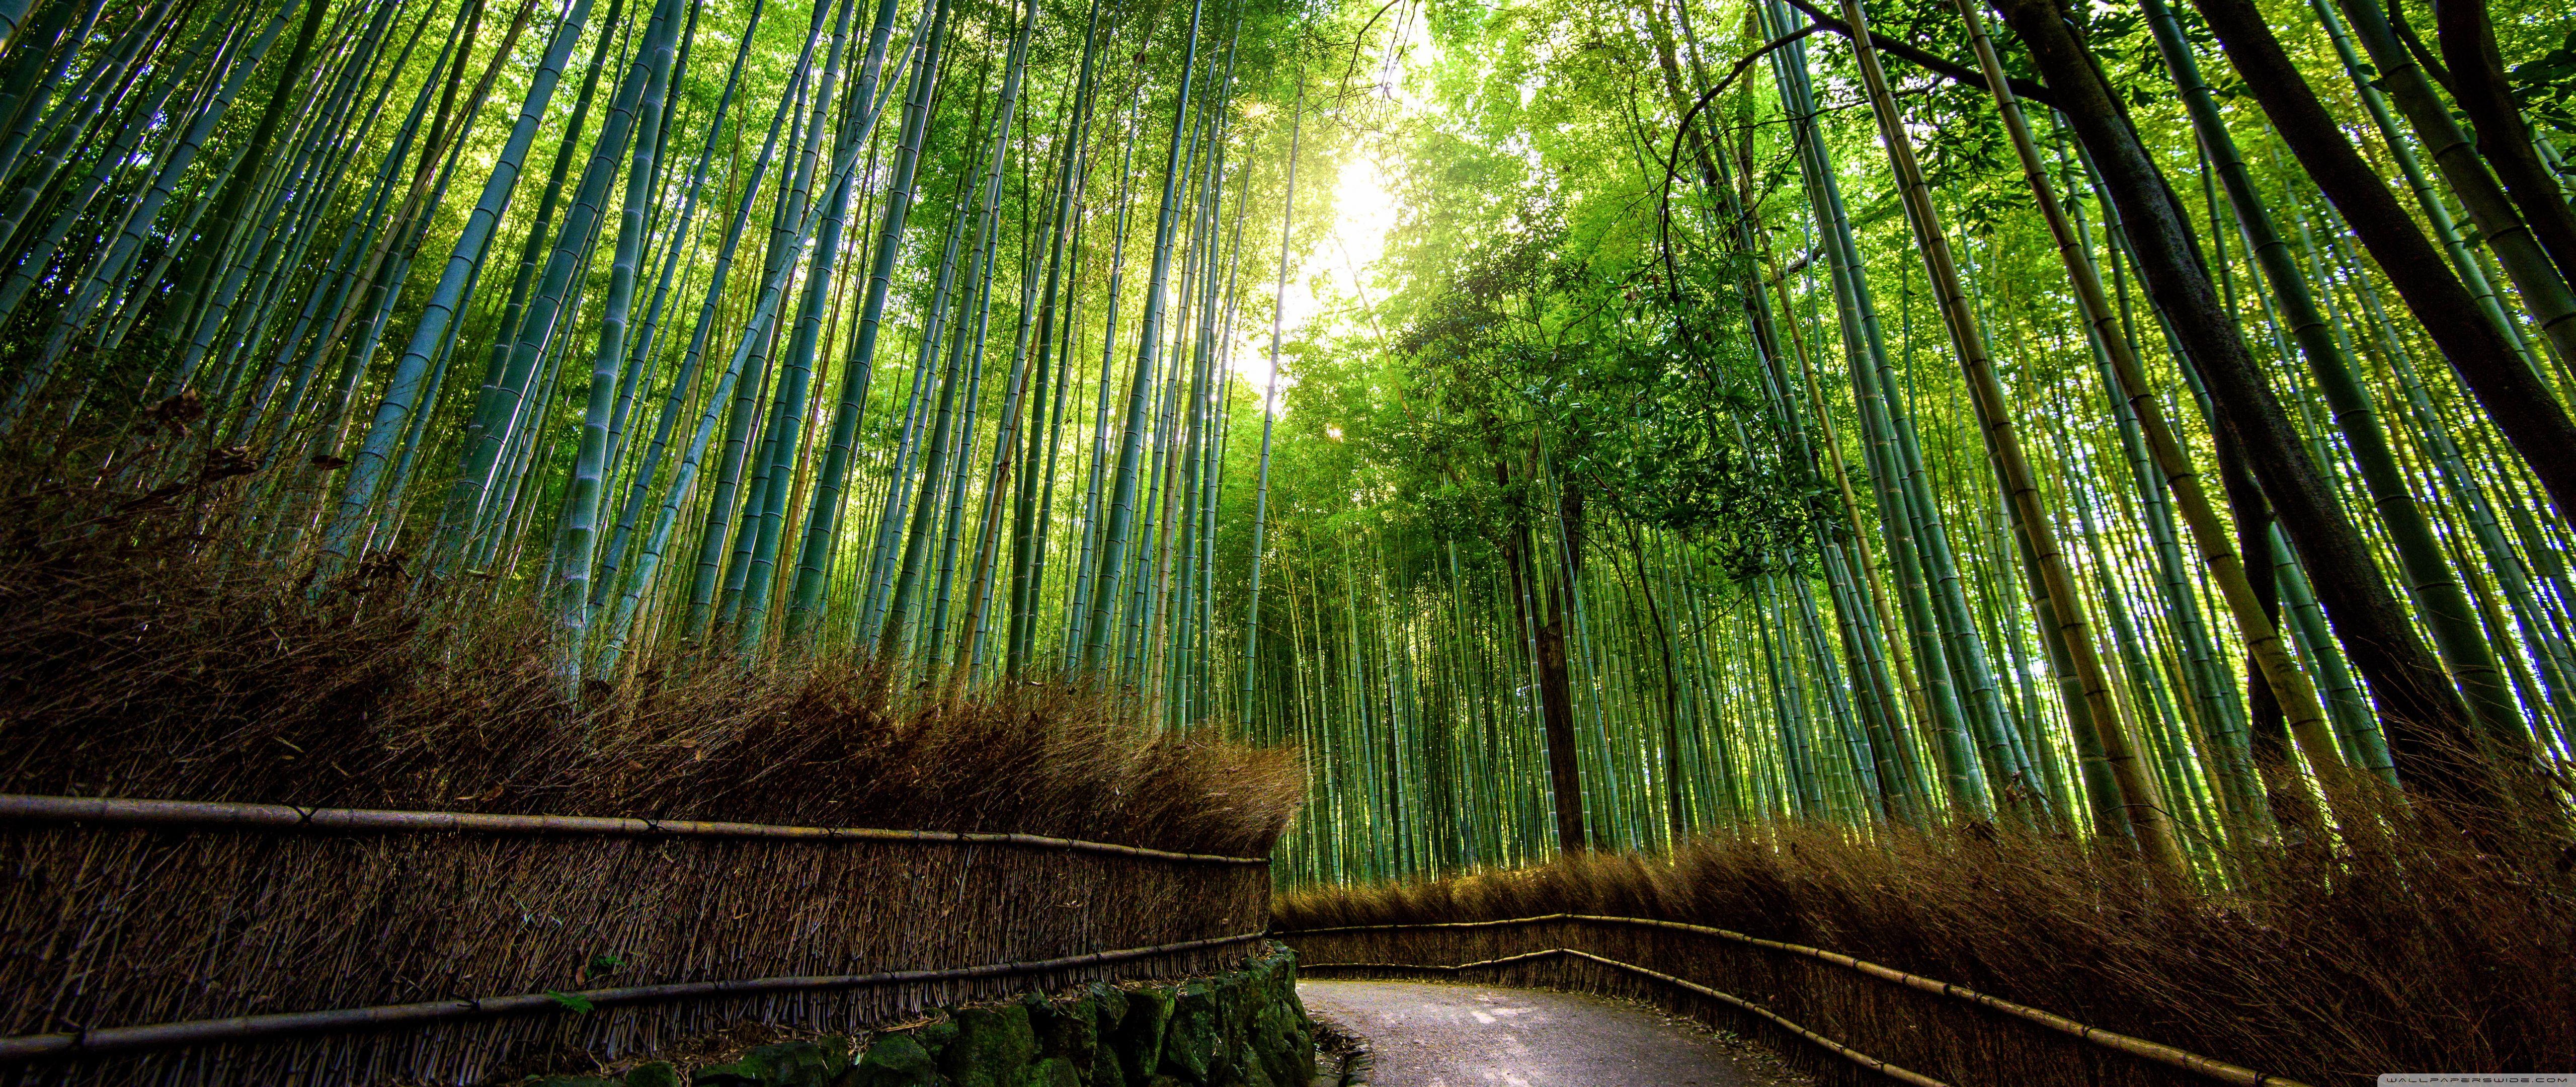 Bamboo Wallpapers 7